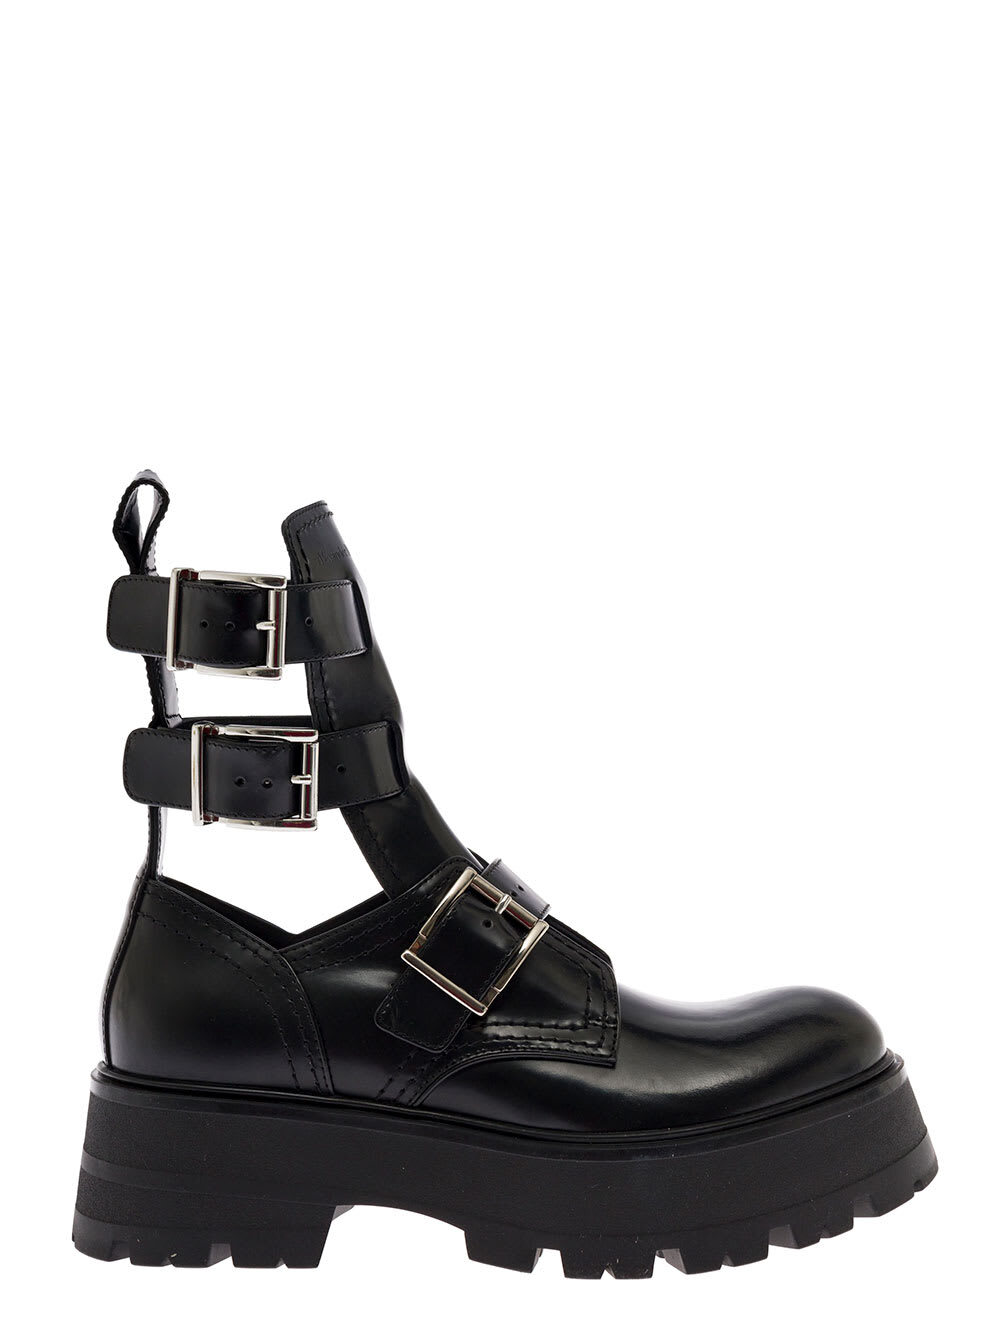 Alexander McQueen Alexander Macqueen Womans Black Rave Buckle Leather Ankle Boots